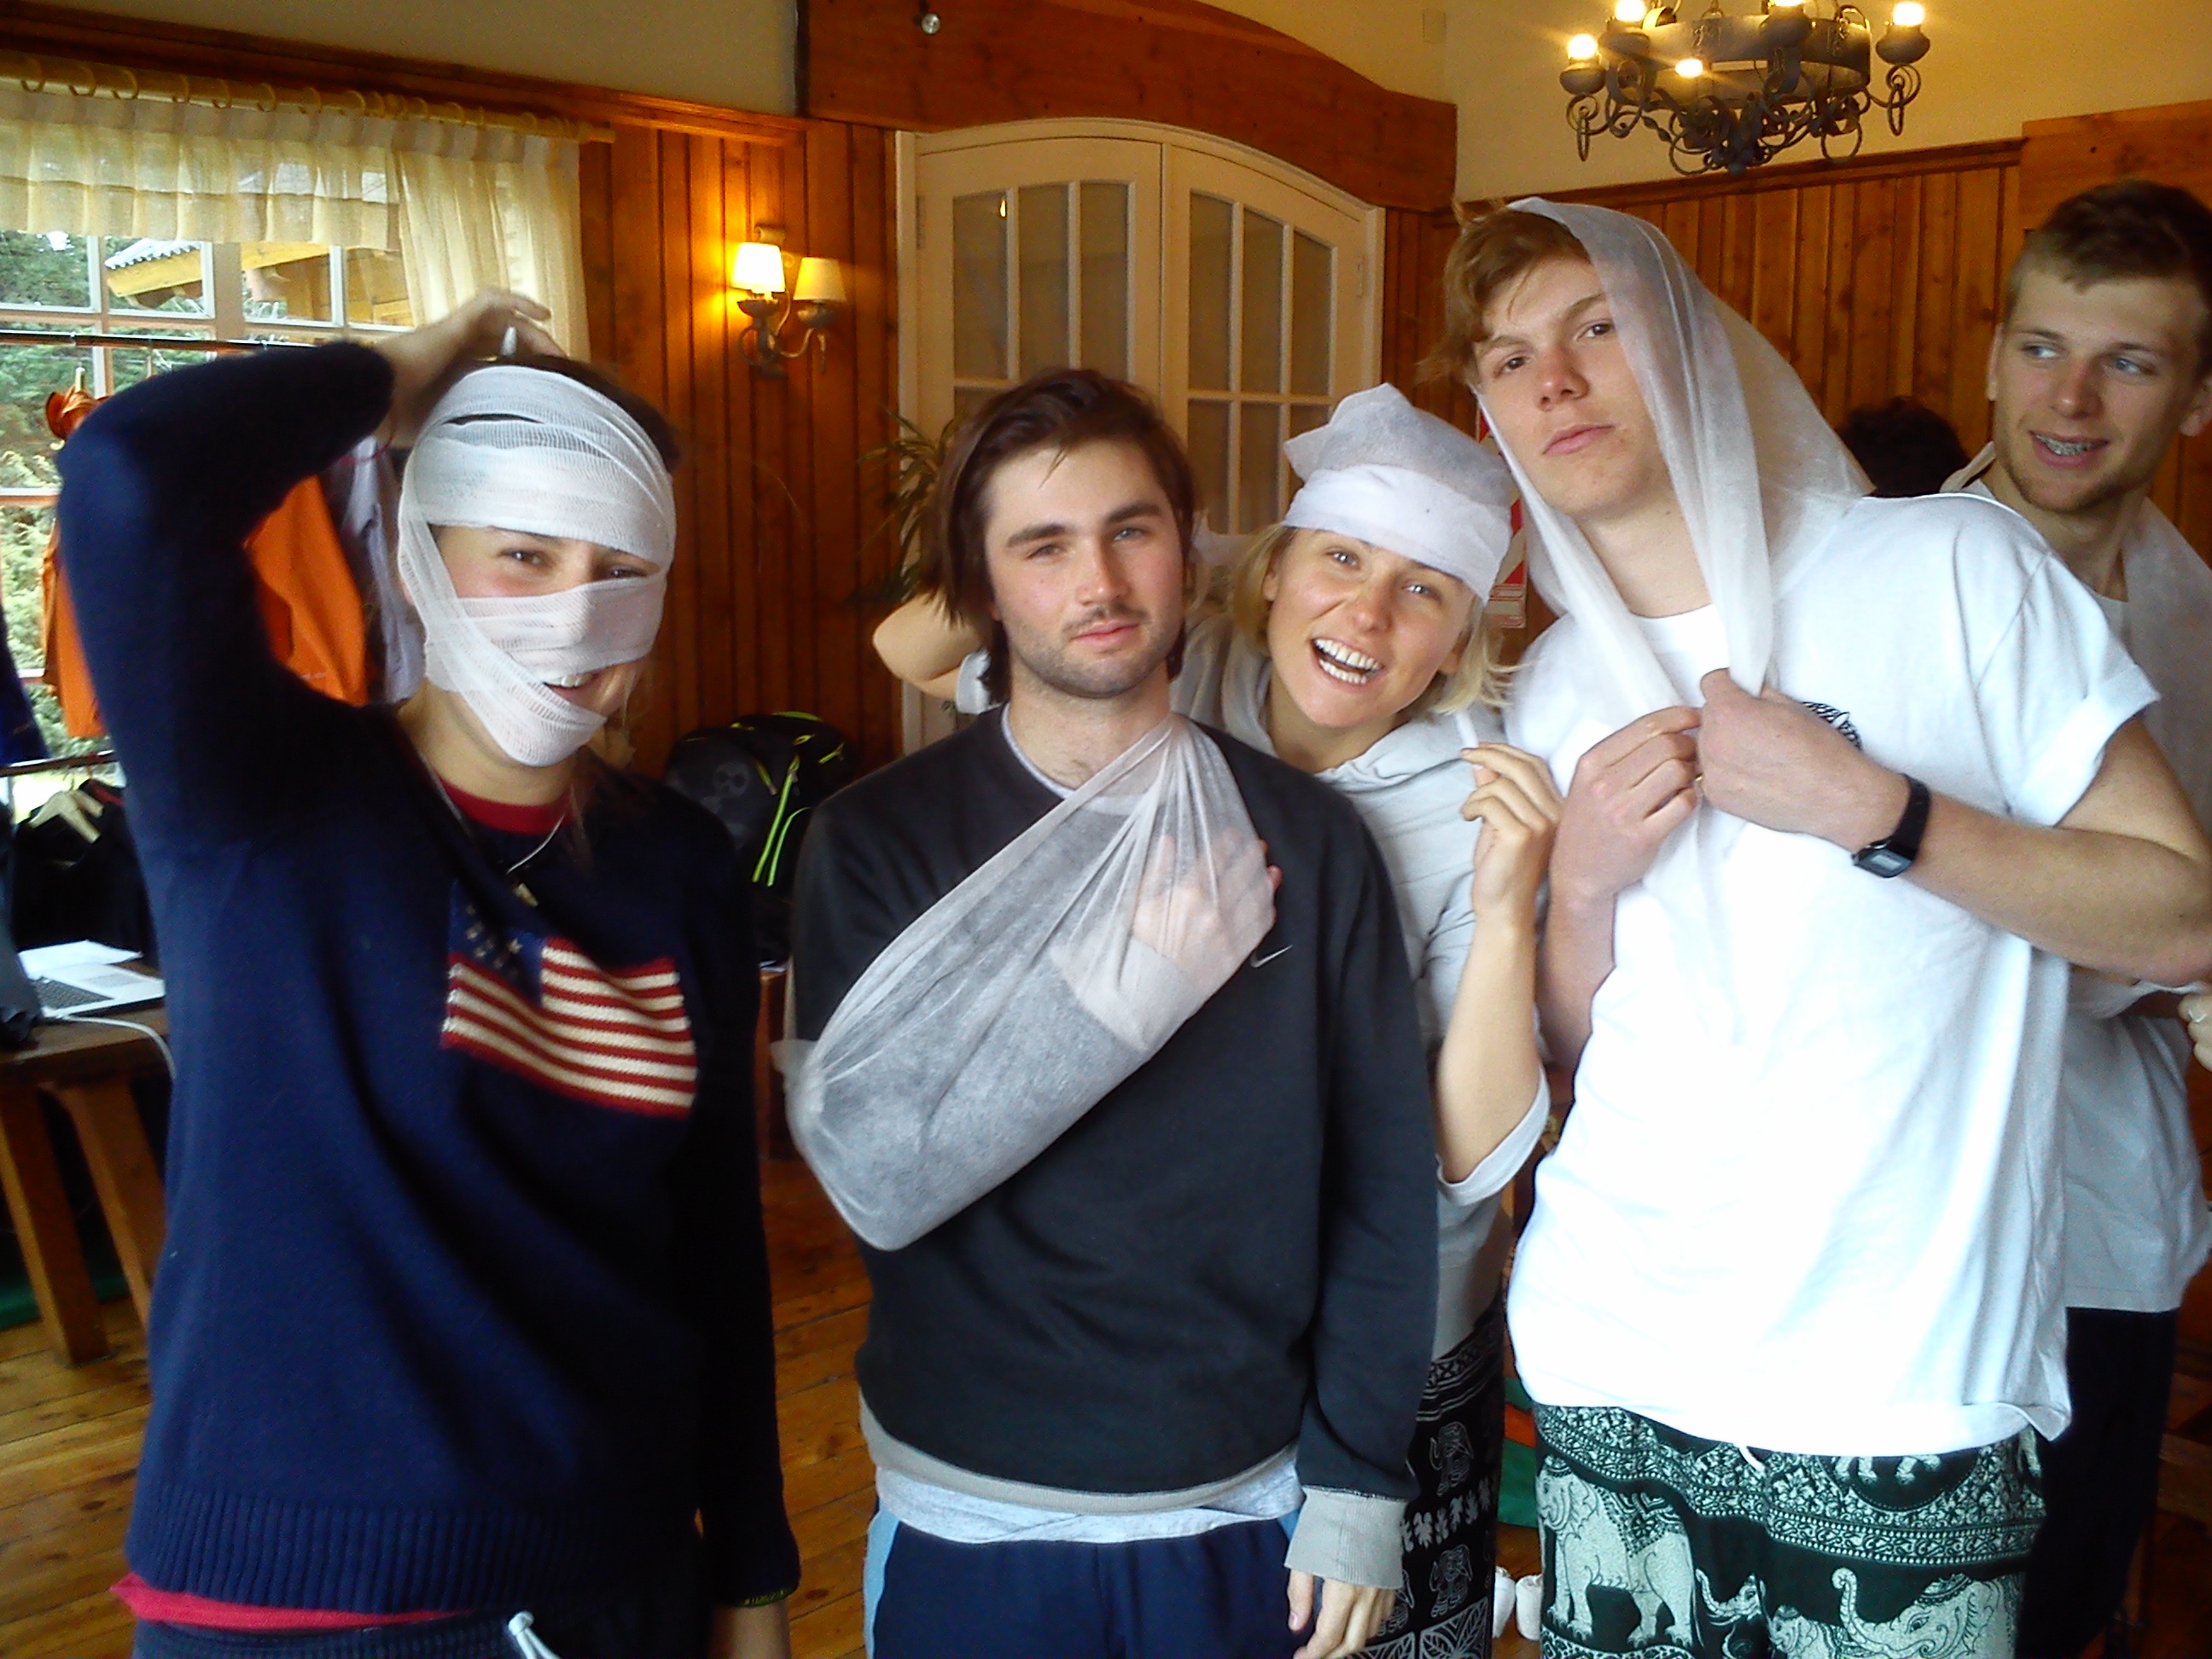 All bandaged up in First Aid training before working in the snow sports industry